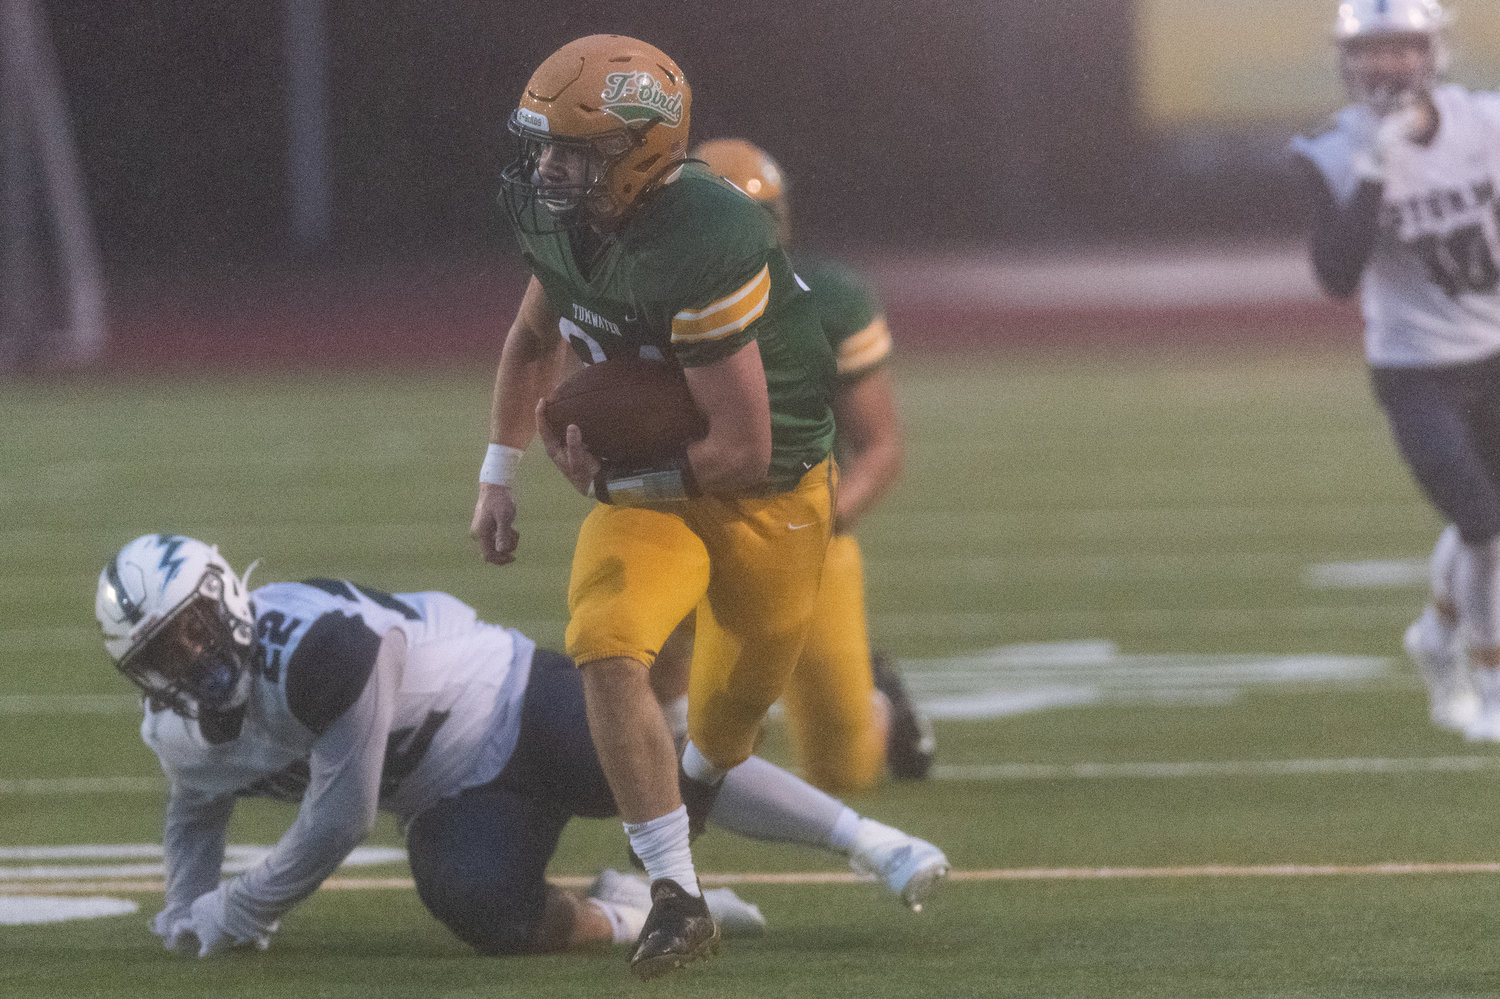 Tumwater tailback Payton Hoyt looks downfield with the ball against Squalicum in the 2A state semifinals Nov. 27.